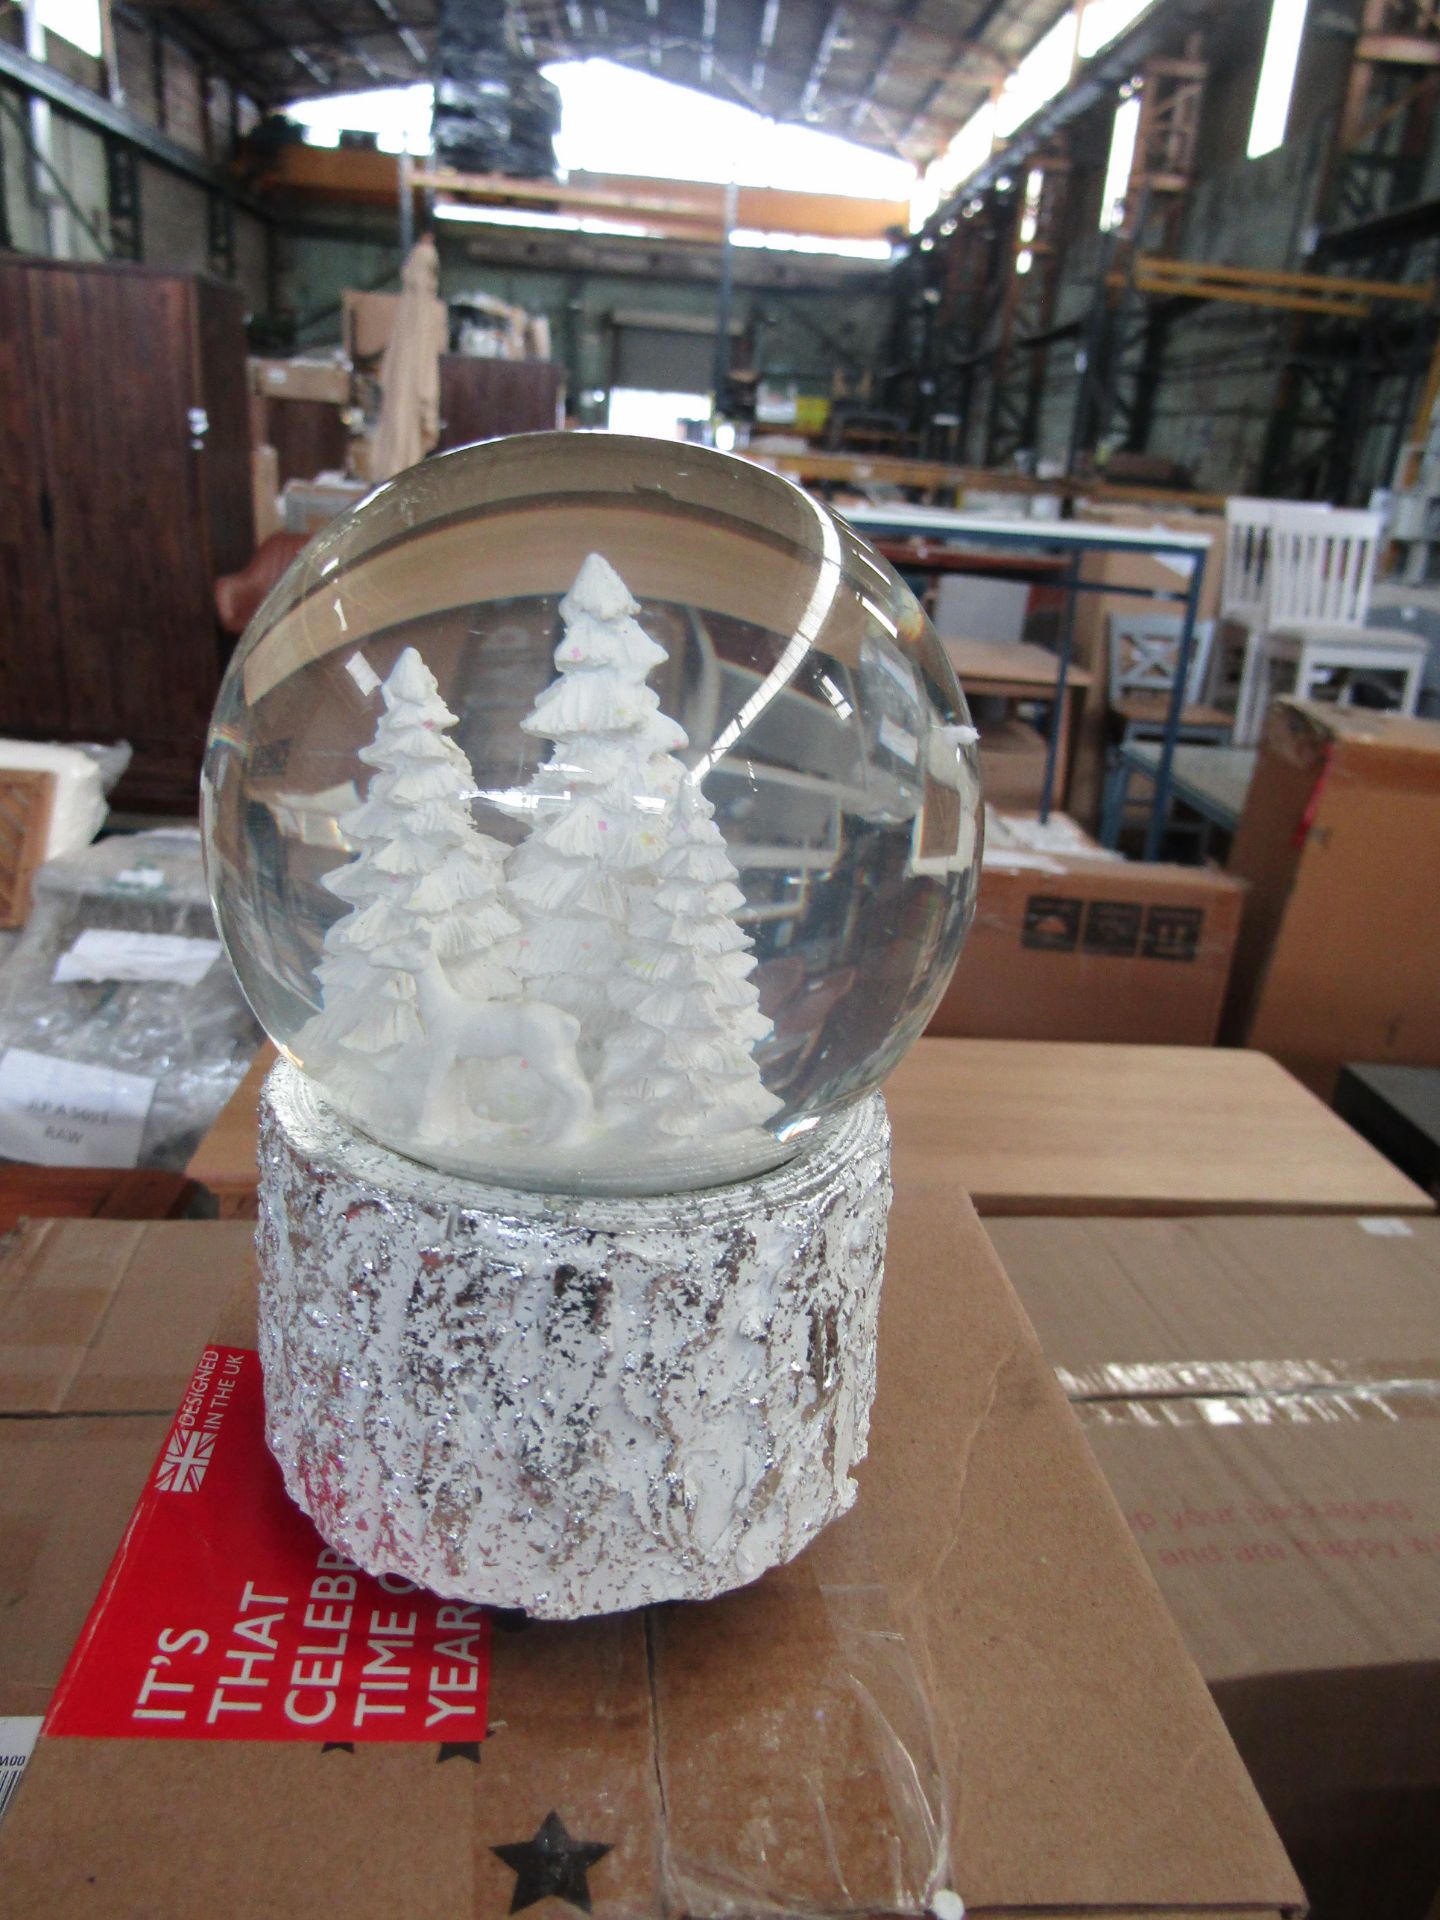 Celebright - Wind-Up & Play White Tree Scene Musical Snowglobe - Unchecked & Boxed.